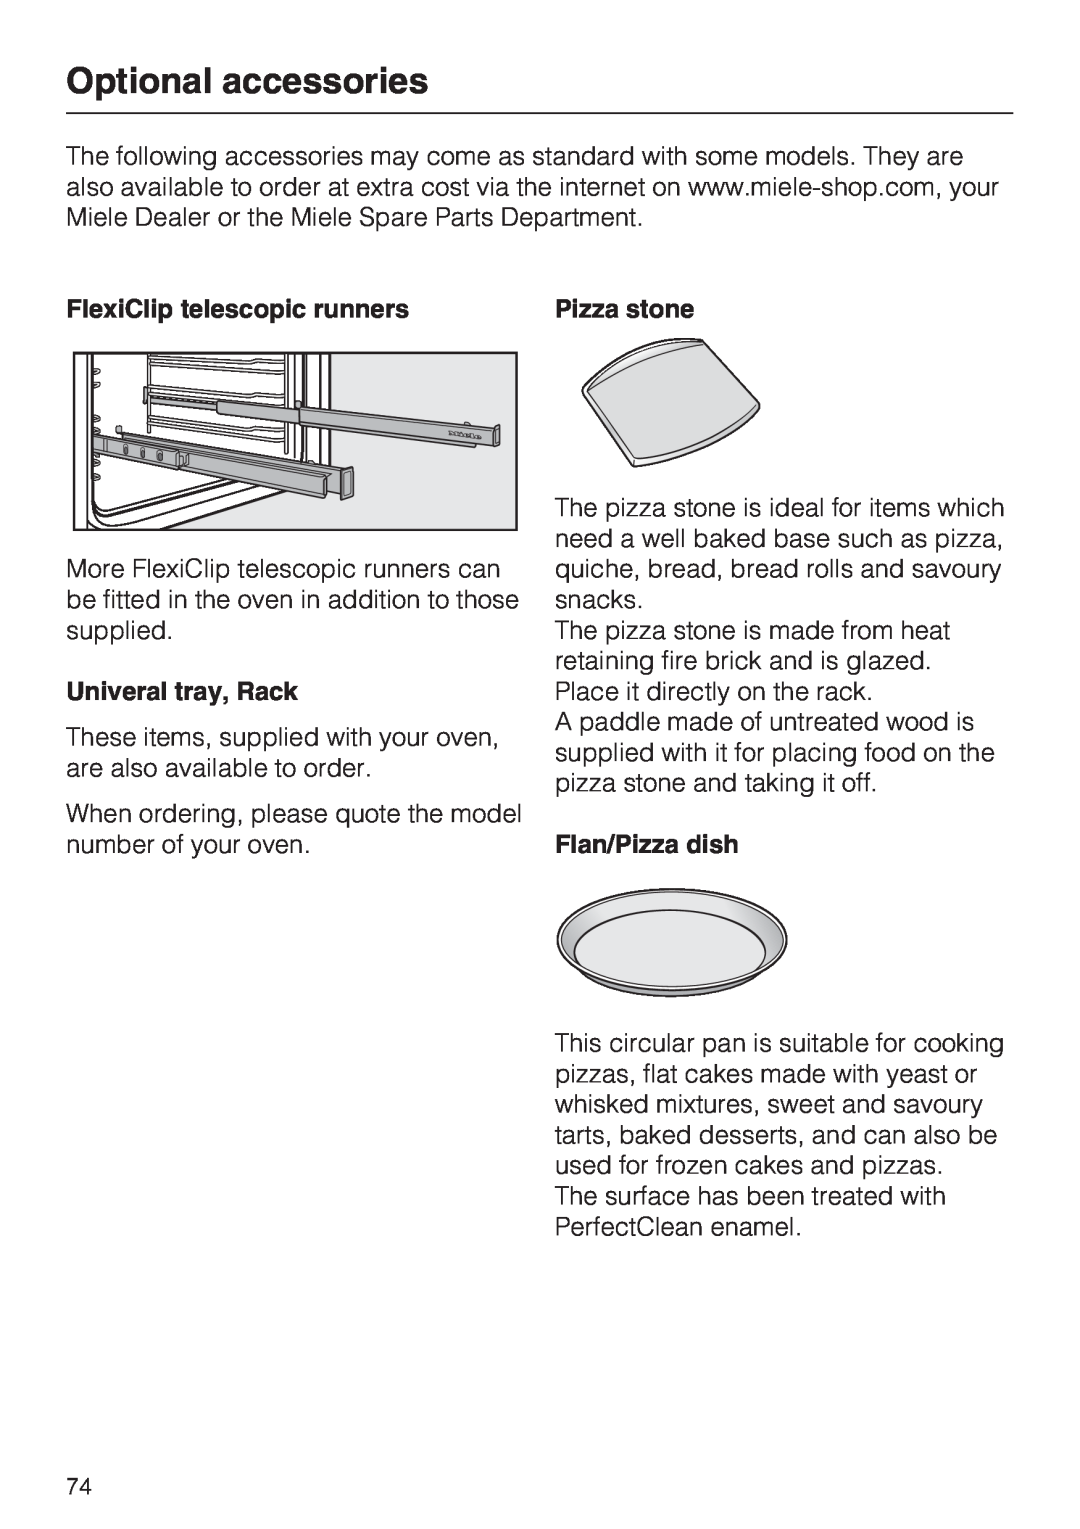 Miele H 5961 B Optional accessories, Univeral tray, Rack, Flan/Pizza dish, FlexiClip telescopic runners 